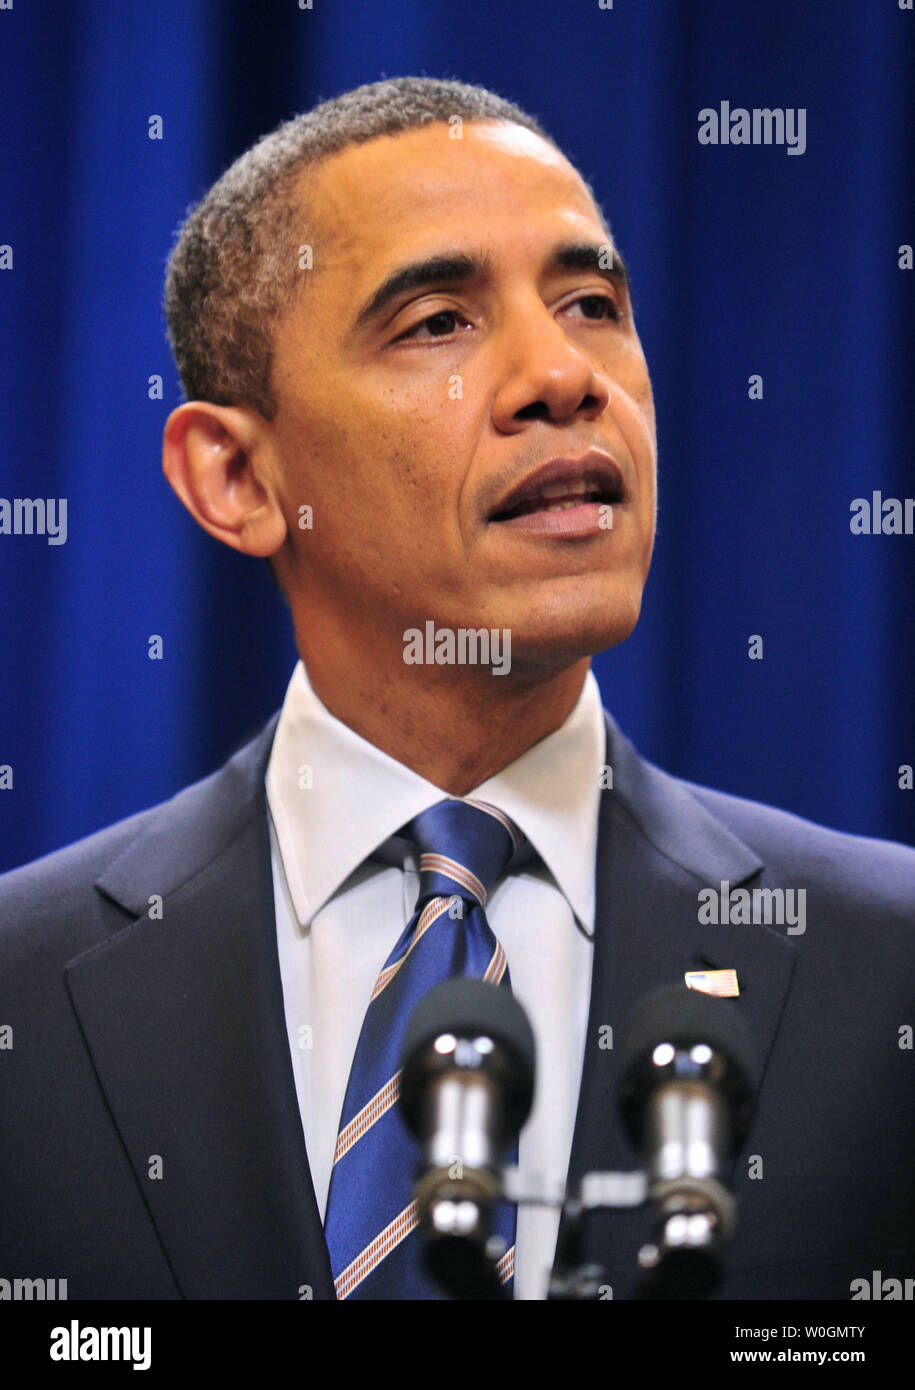 President Barack Obama speaks about the details of a $26 billion housing settlement between federal and state officials and mortgage lenders, in the Eisenhower Executive Office Building in Washington, DC on February 6, 2012. The $26 billion agreement settles potential charges of improper forecloses and mortgage fraud. UPI/Kevin Dietsch Stock Photo